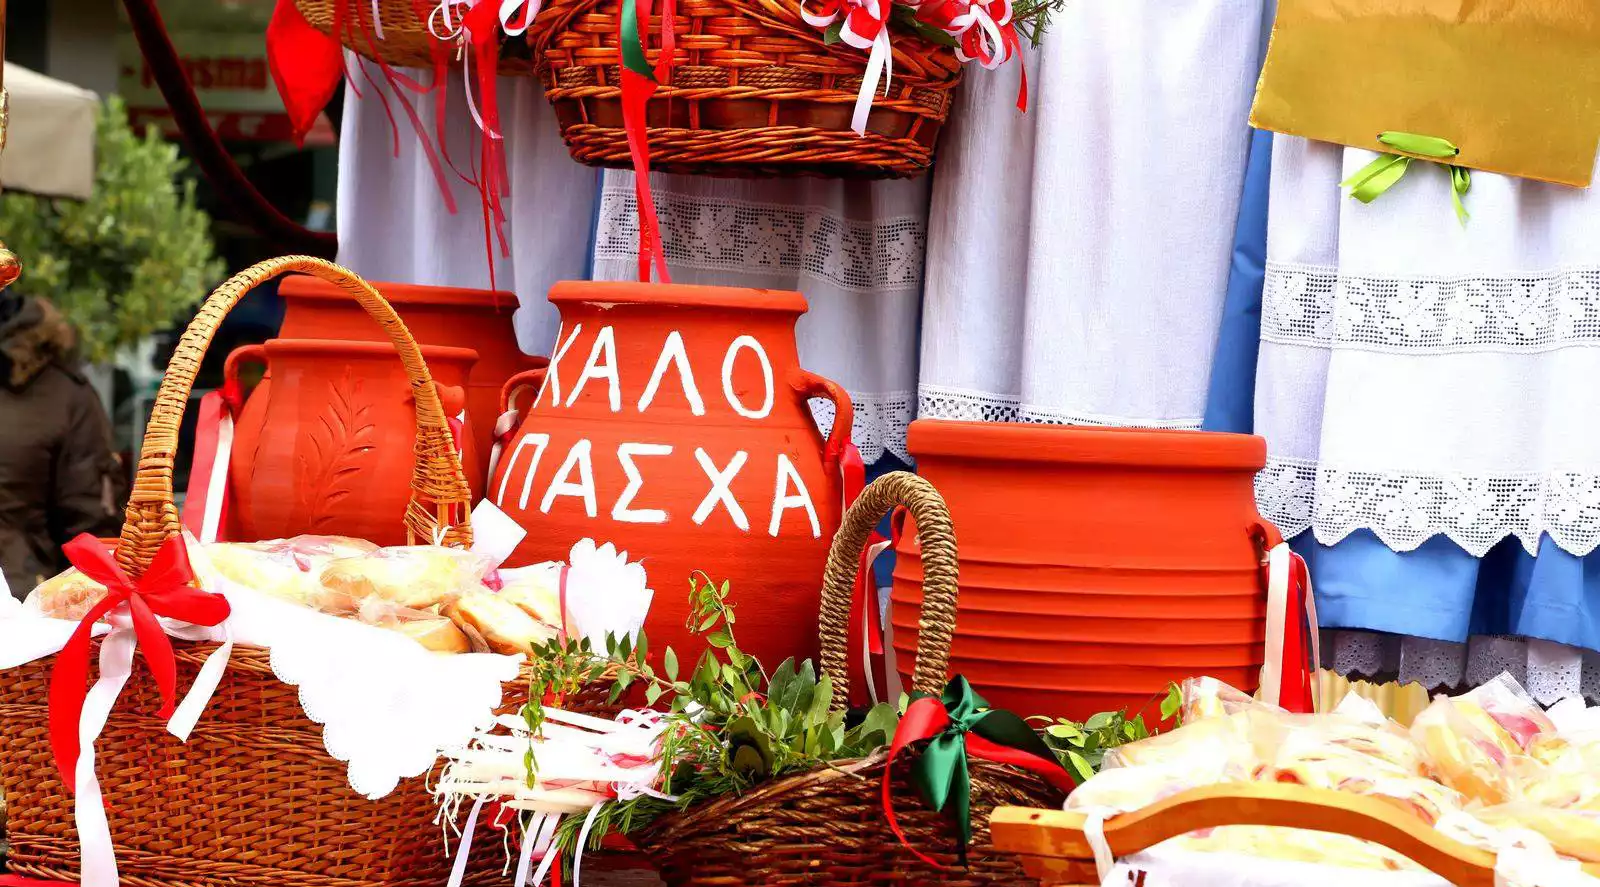 Orthodox Easter rituals endured through generations on the picturesque Ionian island of Kefalonia with devout celebrations.